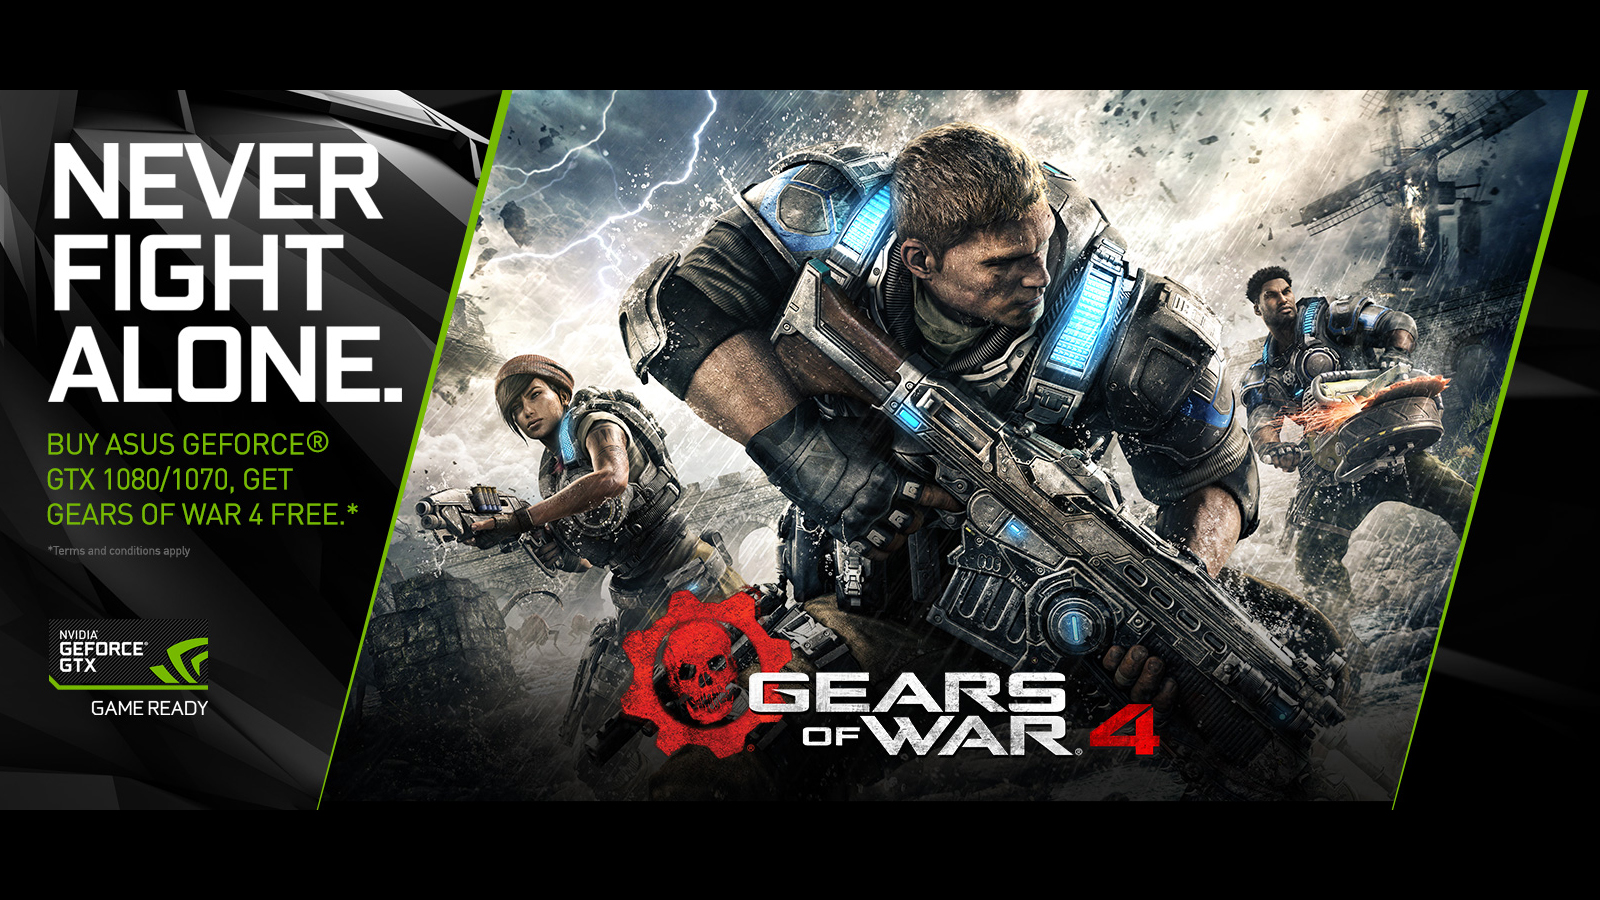 how to download gears of war 4 on pc after getting nvidia